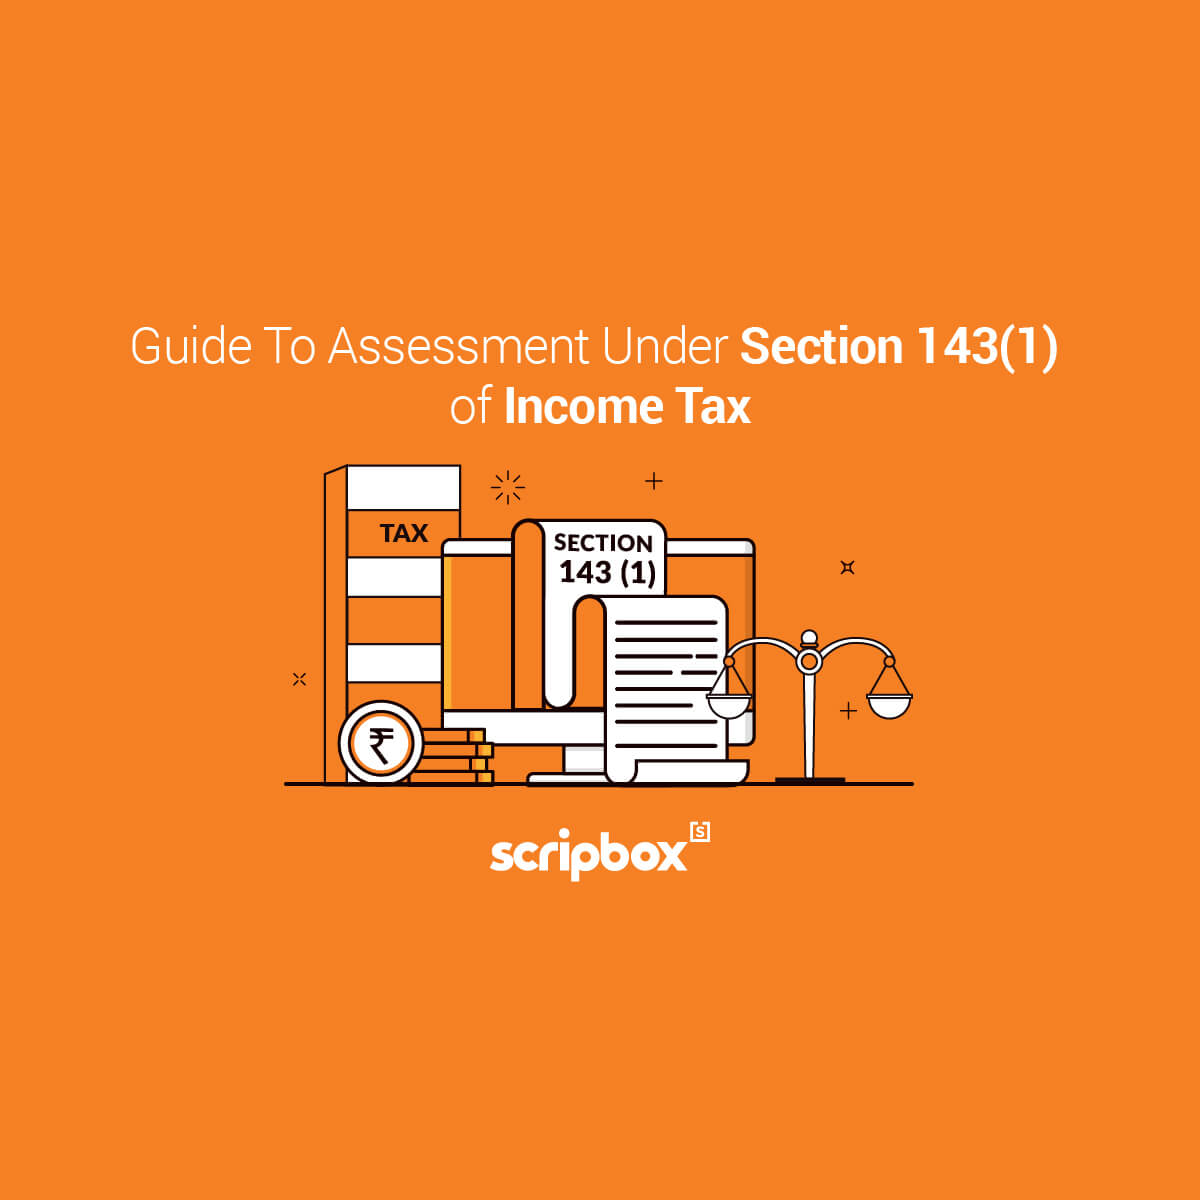 section 143(1) of income tax